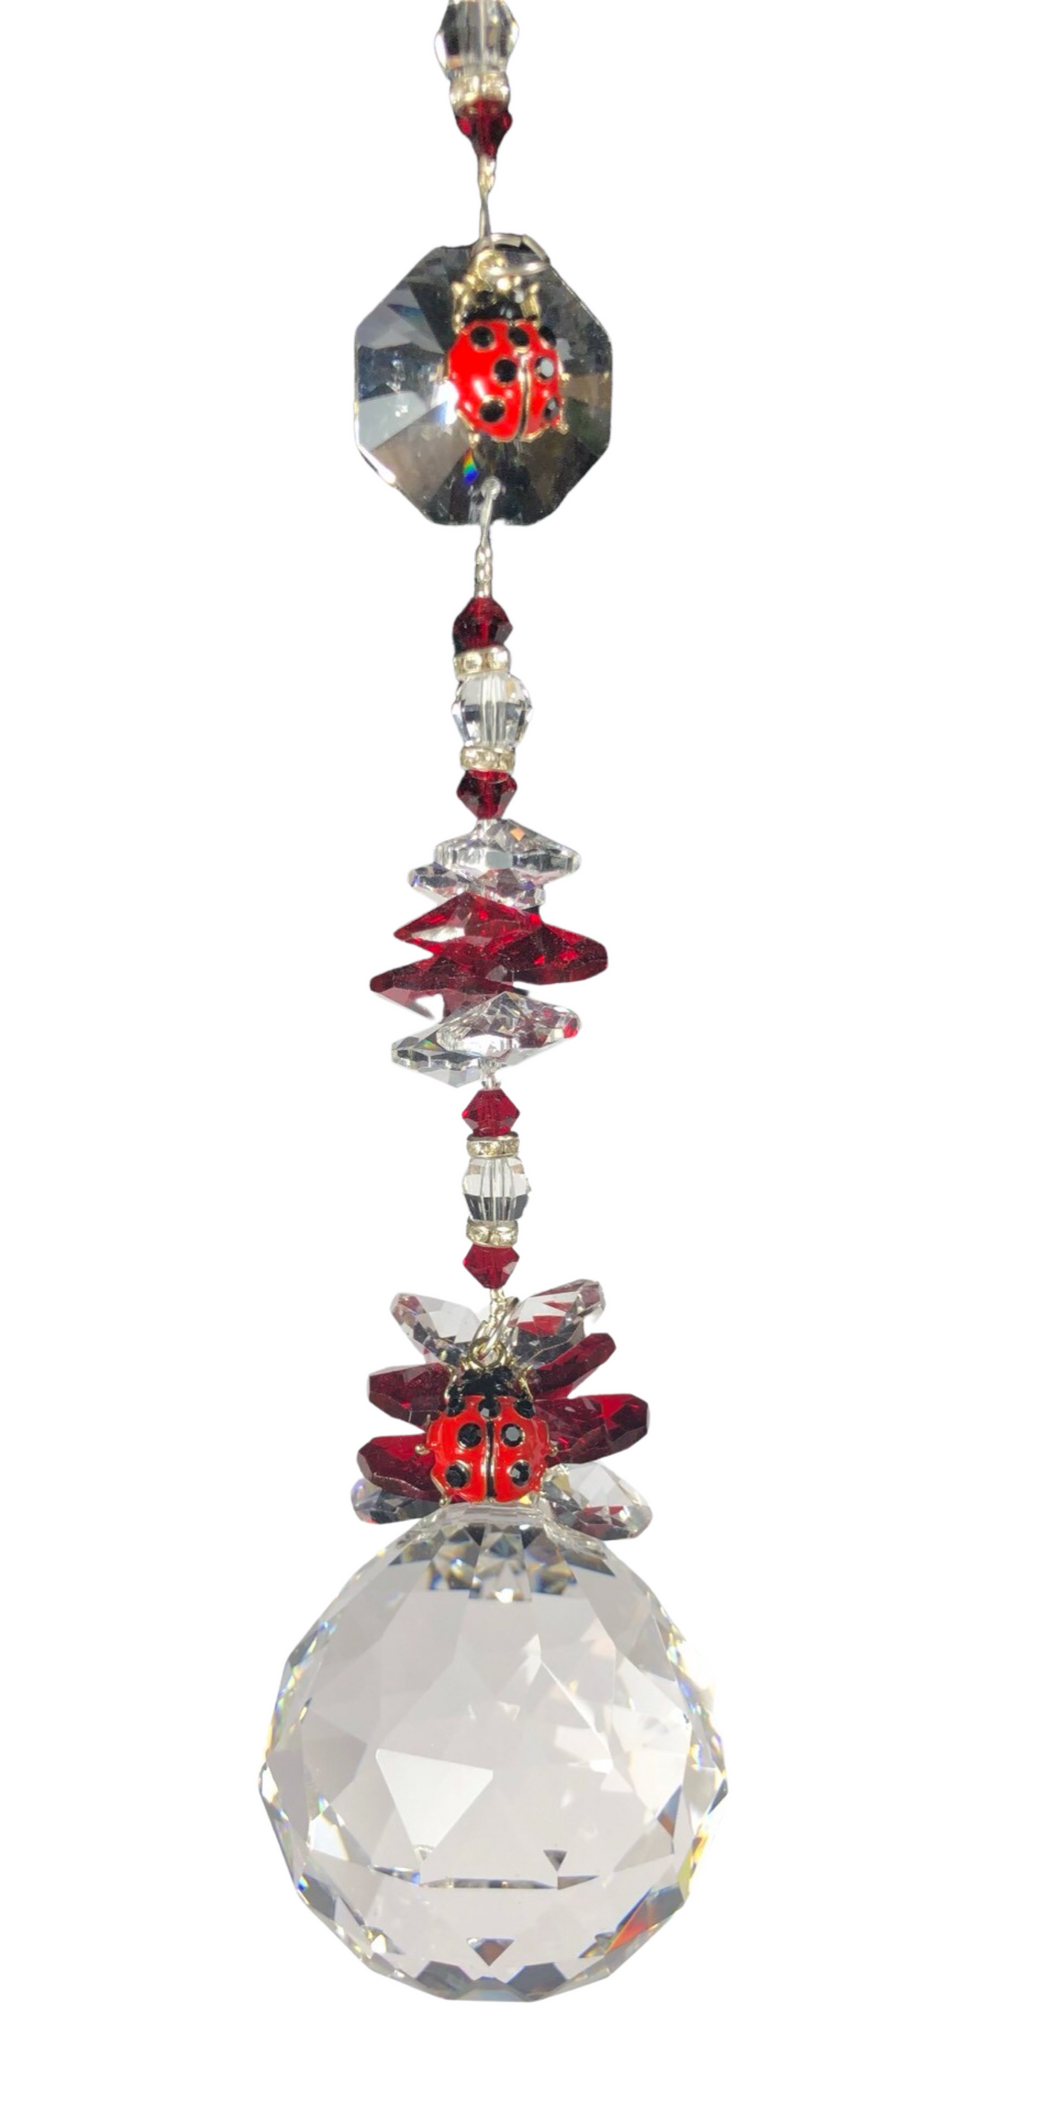 Crystal ball suncatcher which is decorated with a Lady Bugs and Garnet